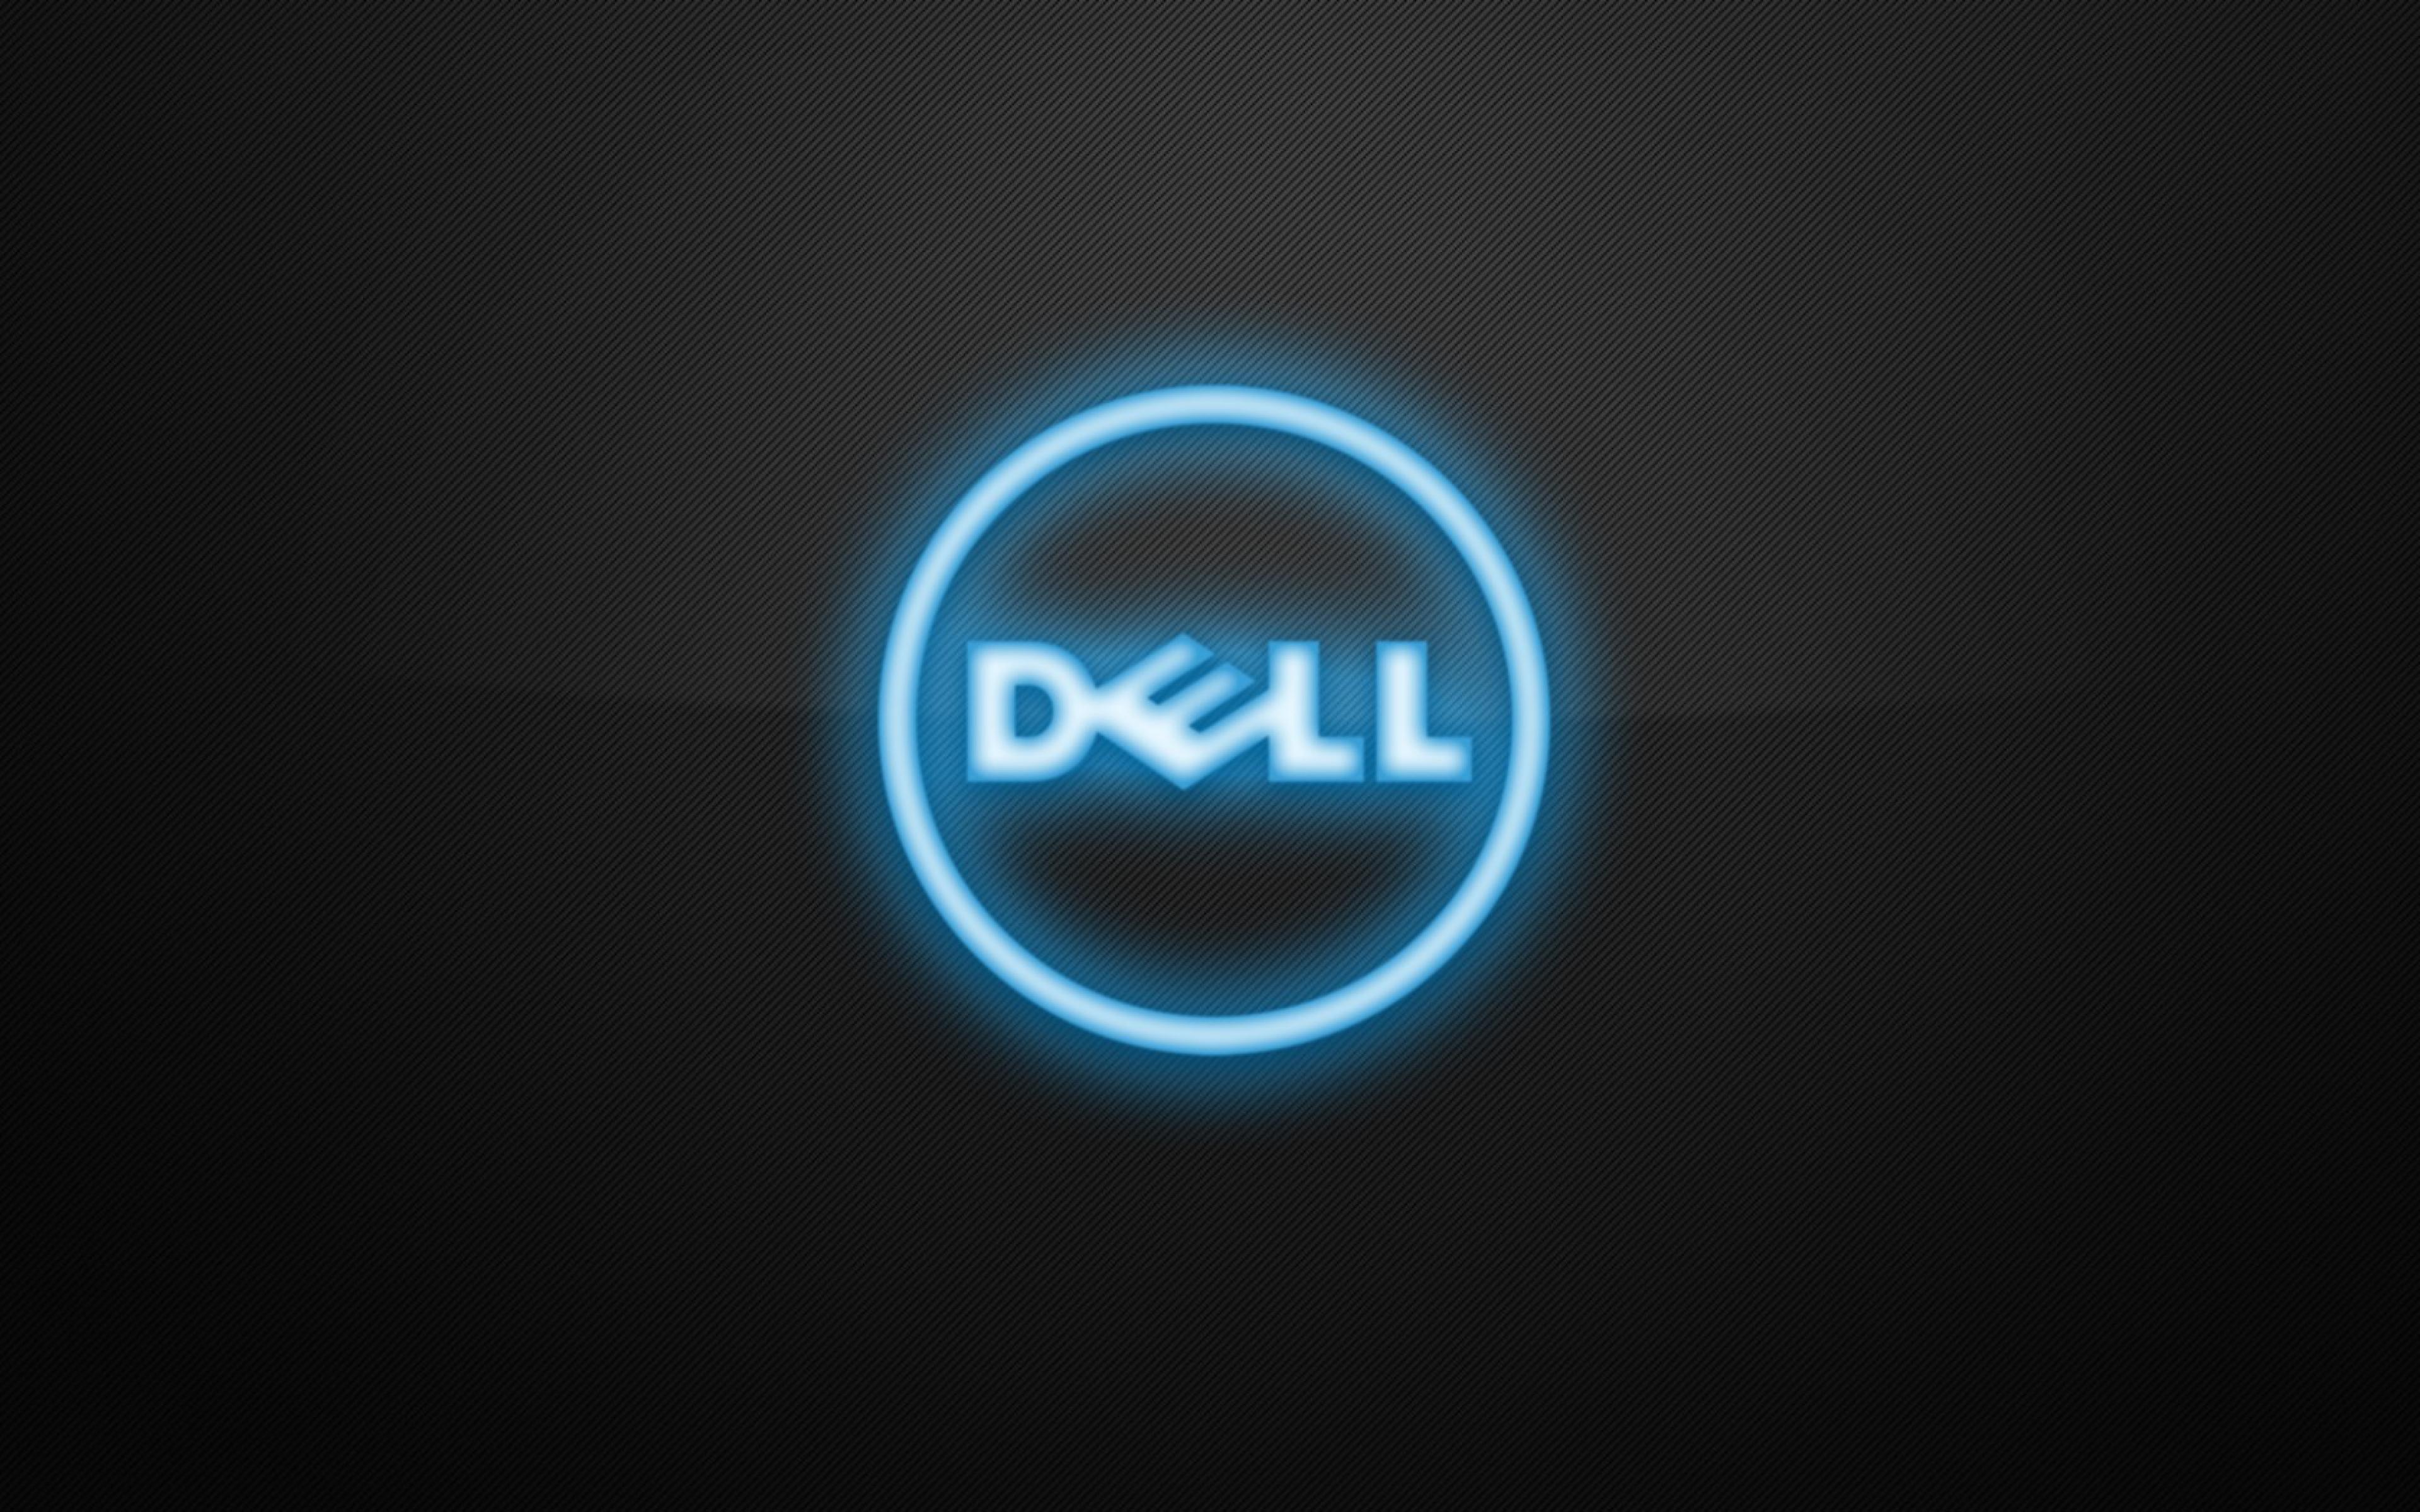 Dell Technologies Zoom Background